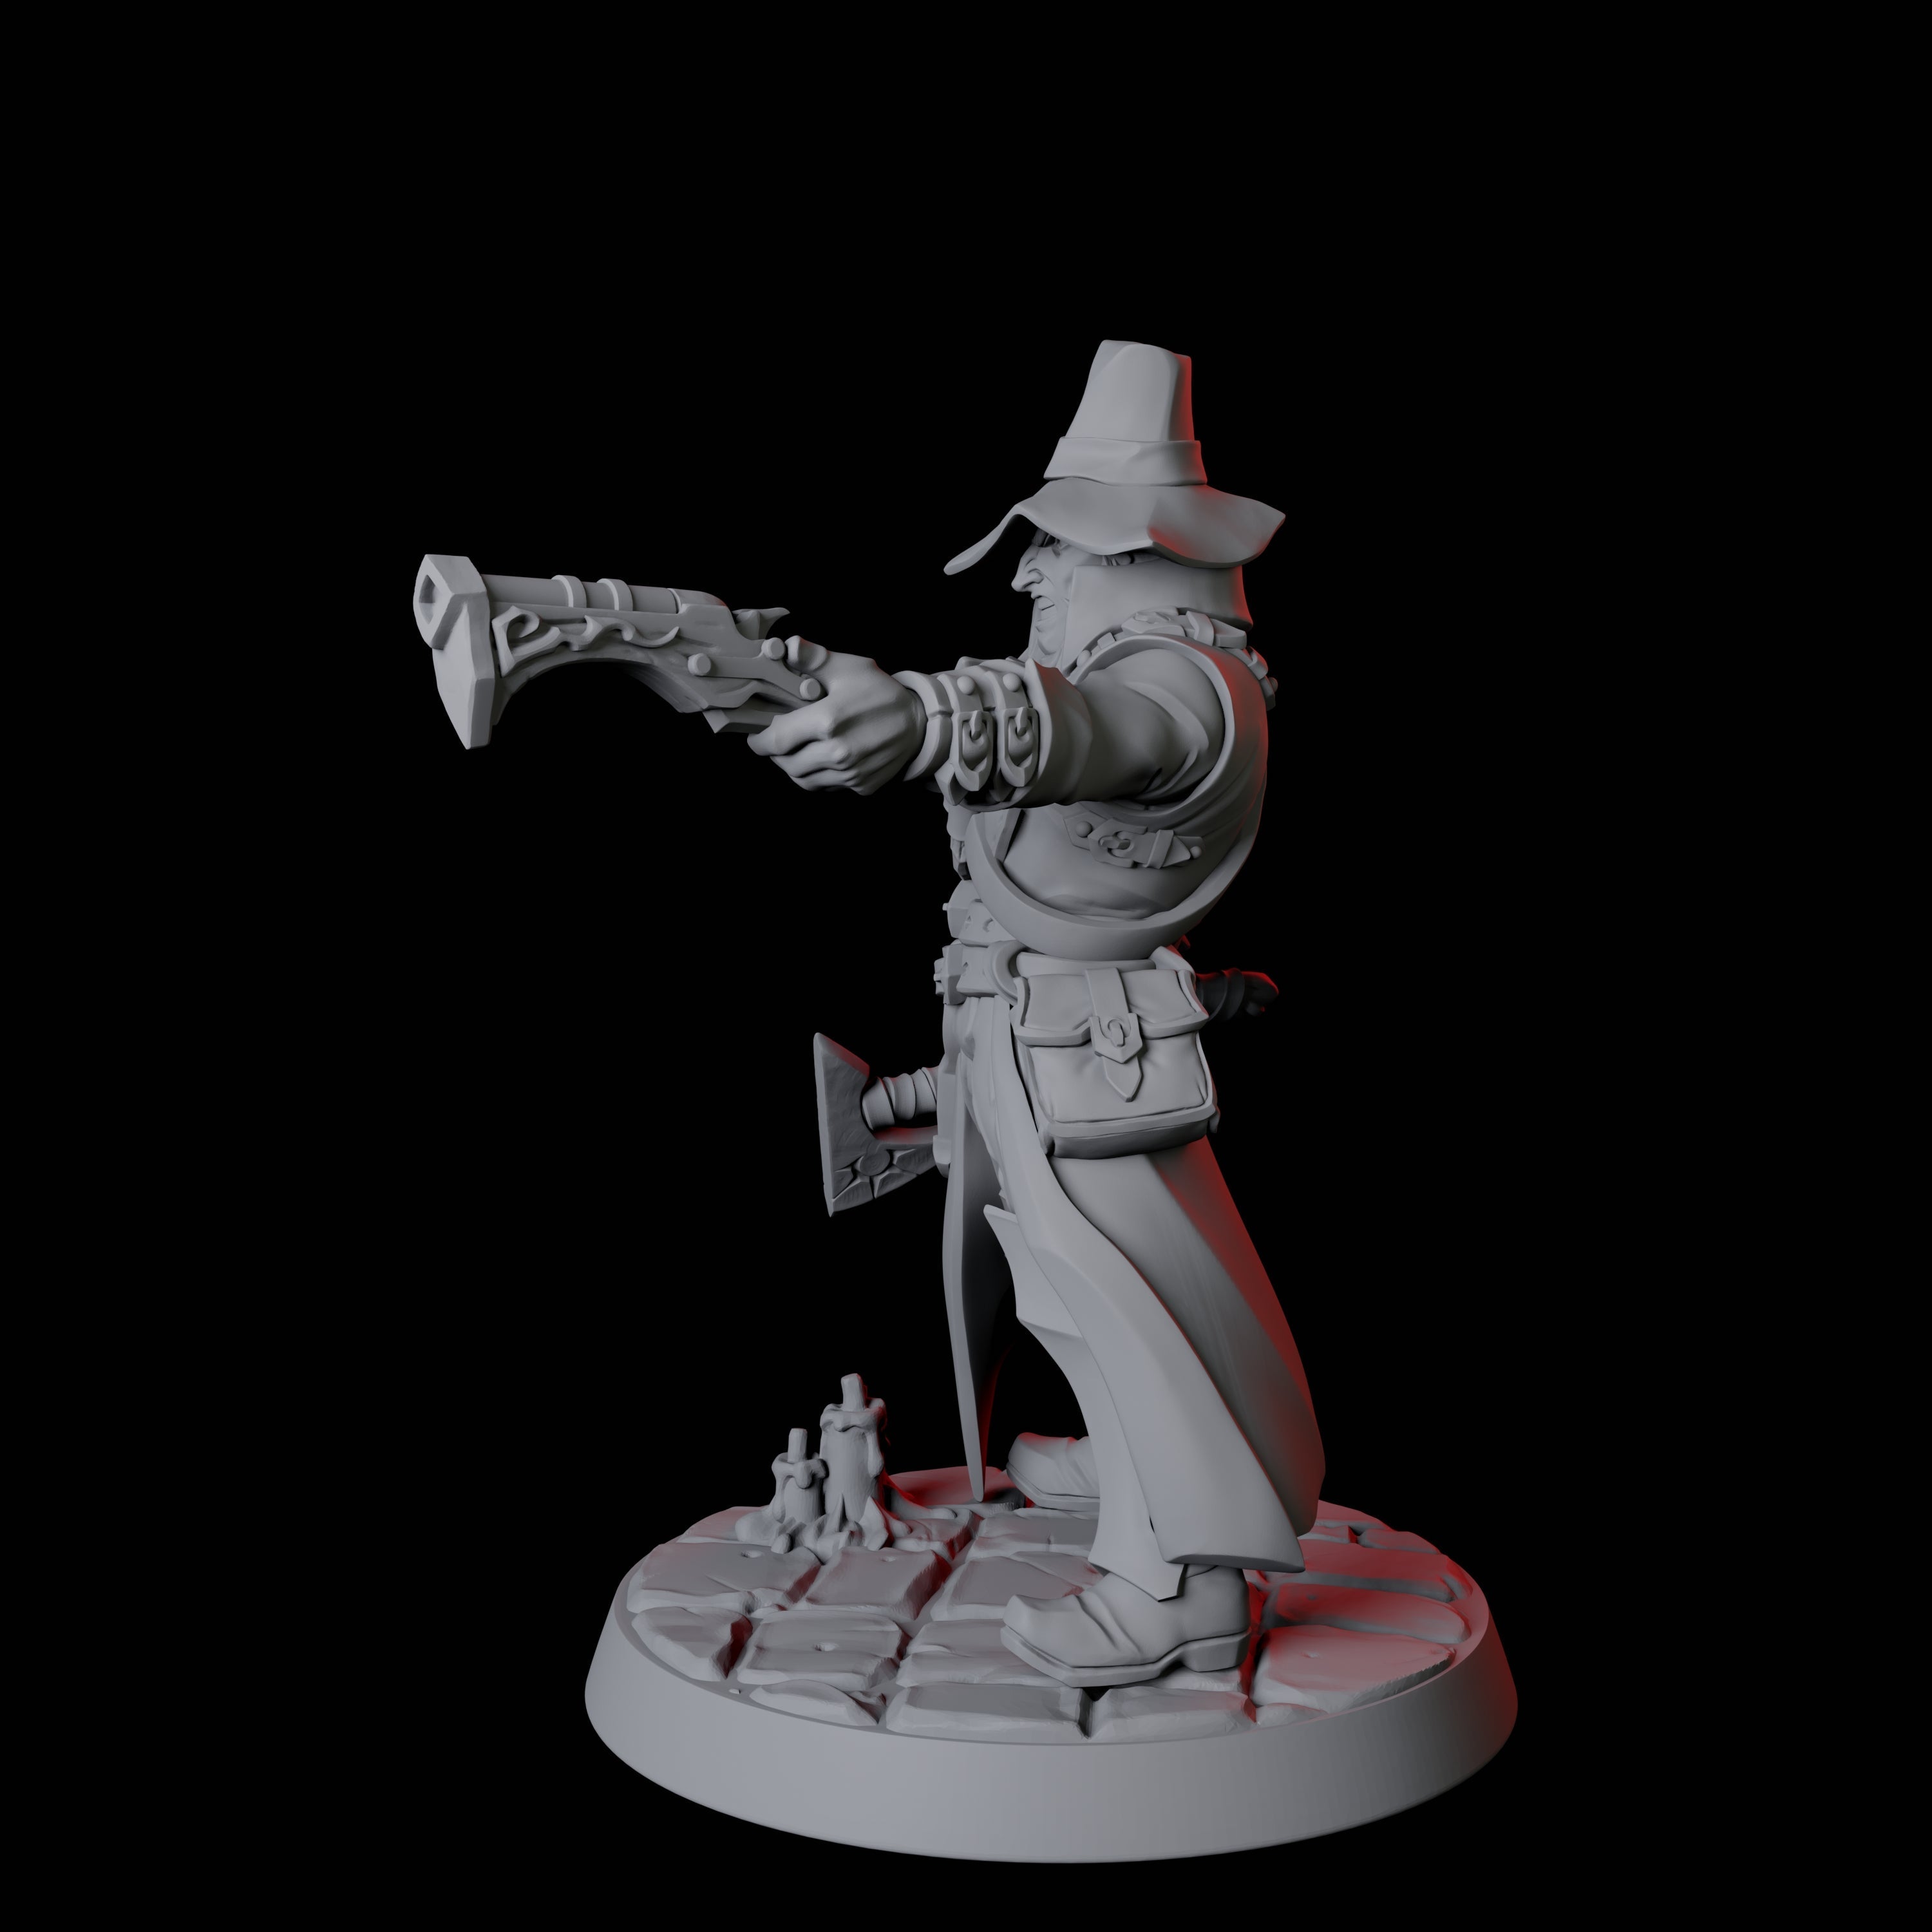 Vampire Hunter B Miniature for Dungeons and Dragons, Pathfinder or other TTRPGs